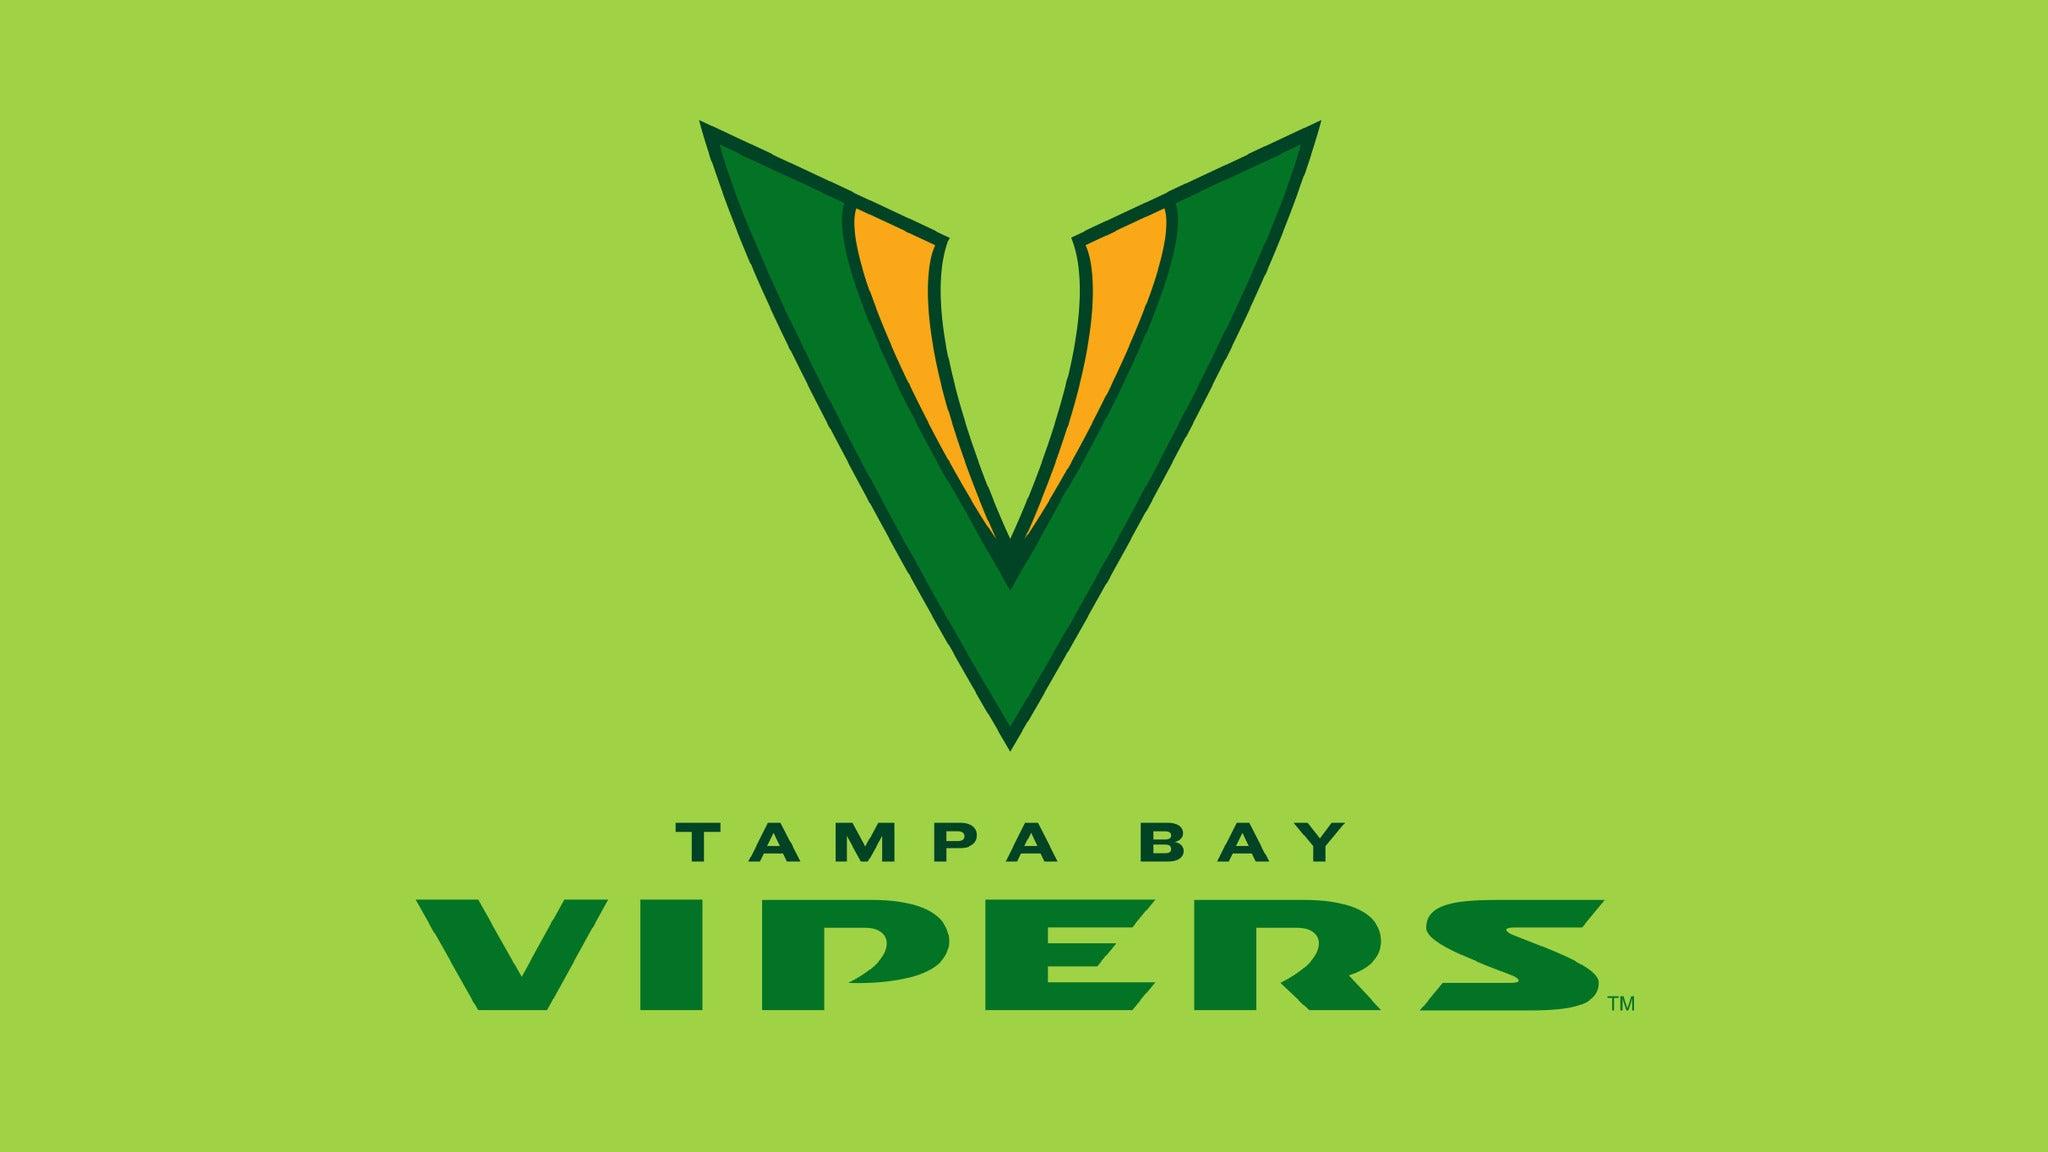 Tampa Bay Vipers Tickets. Single Game Tickets & Schedule